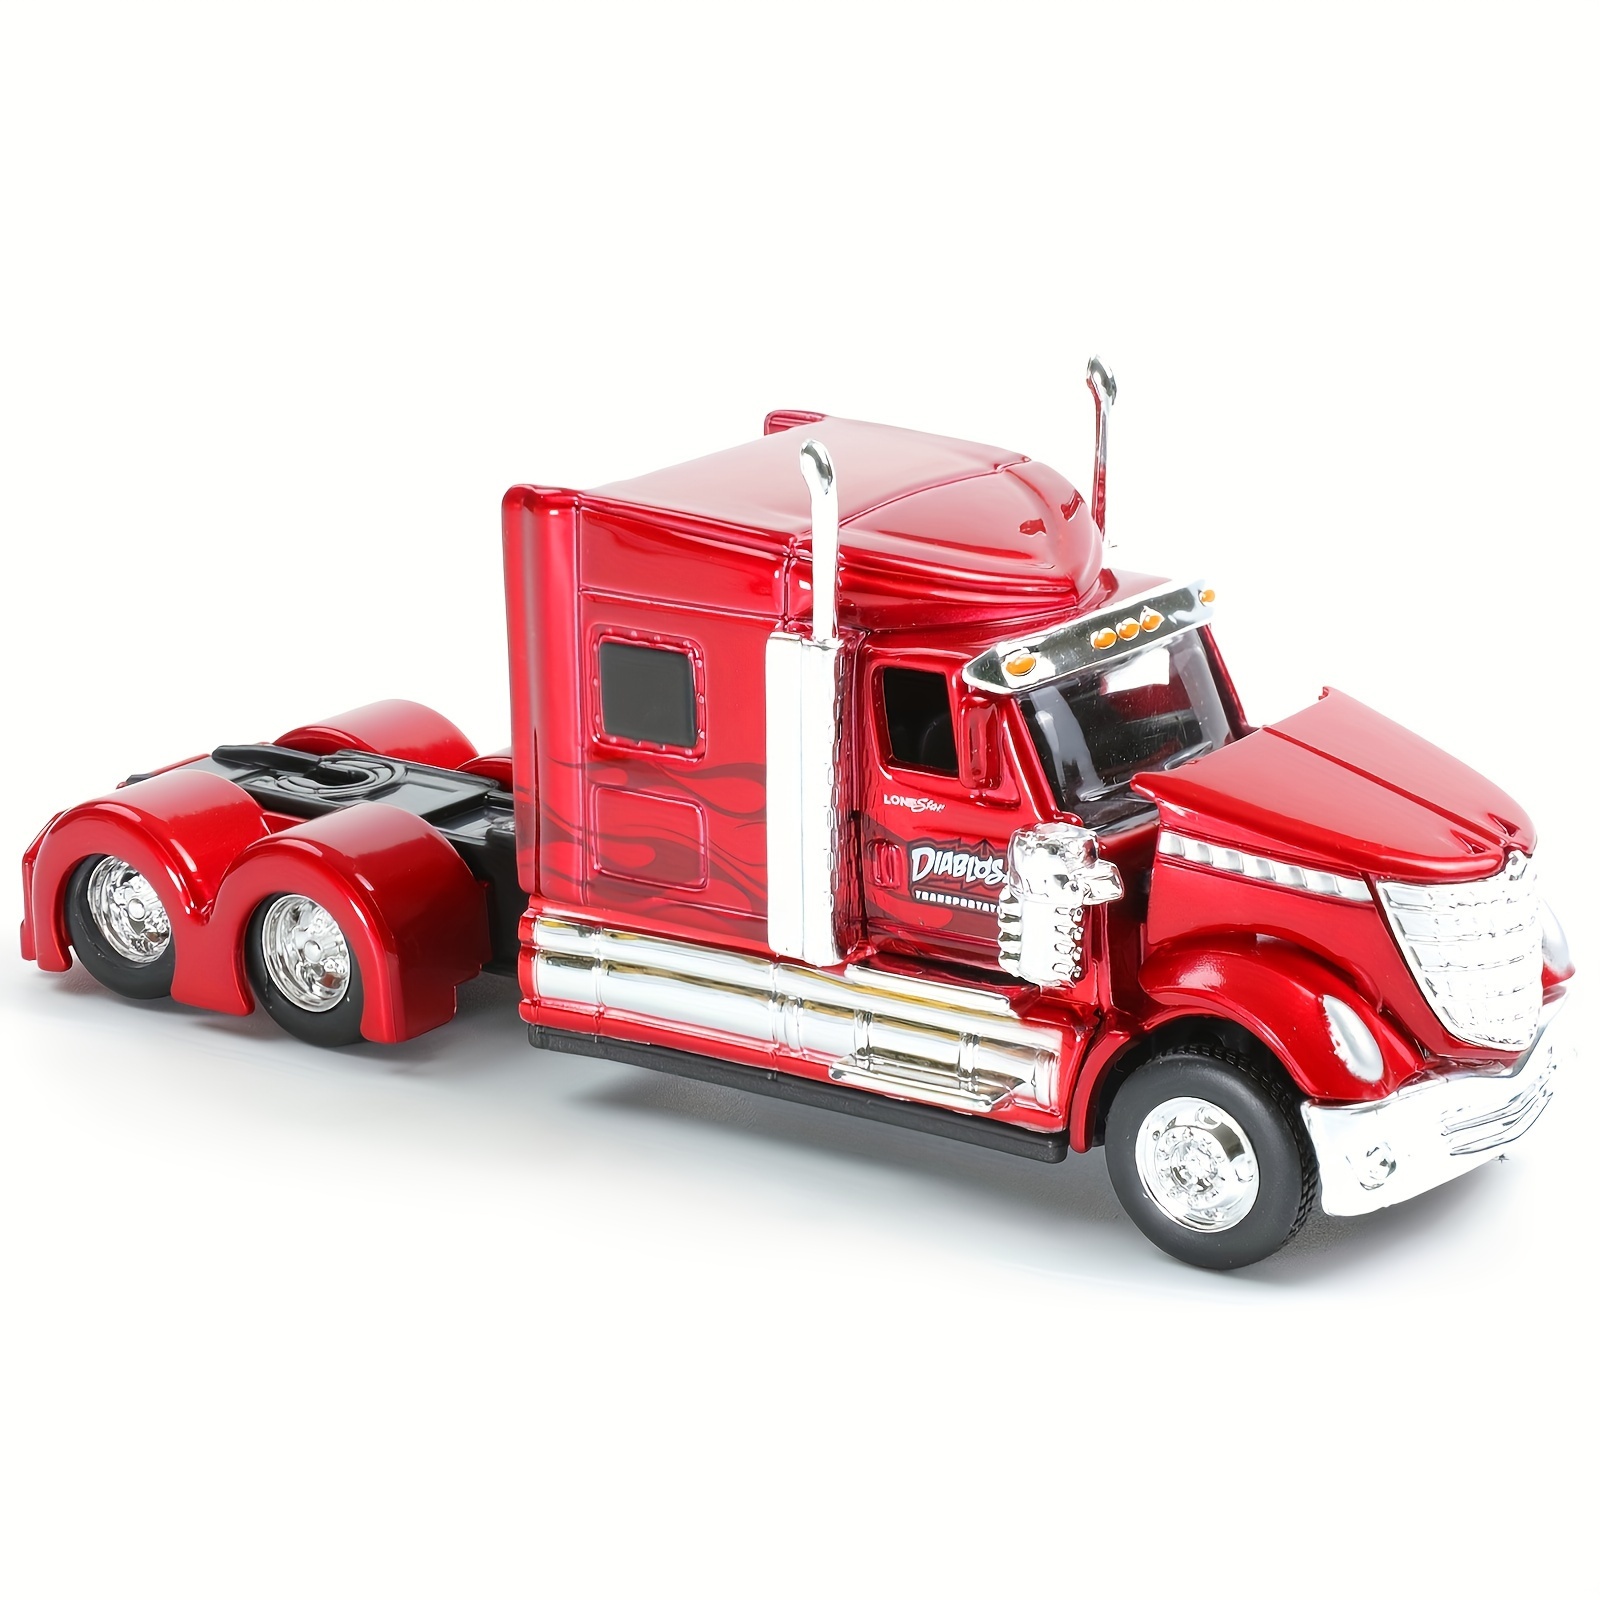 

Maisto International 1/64 Scale Heavy Truck Model - Diecast Alloy Metal, Classic Red Semi Trailer Collectible For Adults Ages 8-12